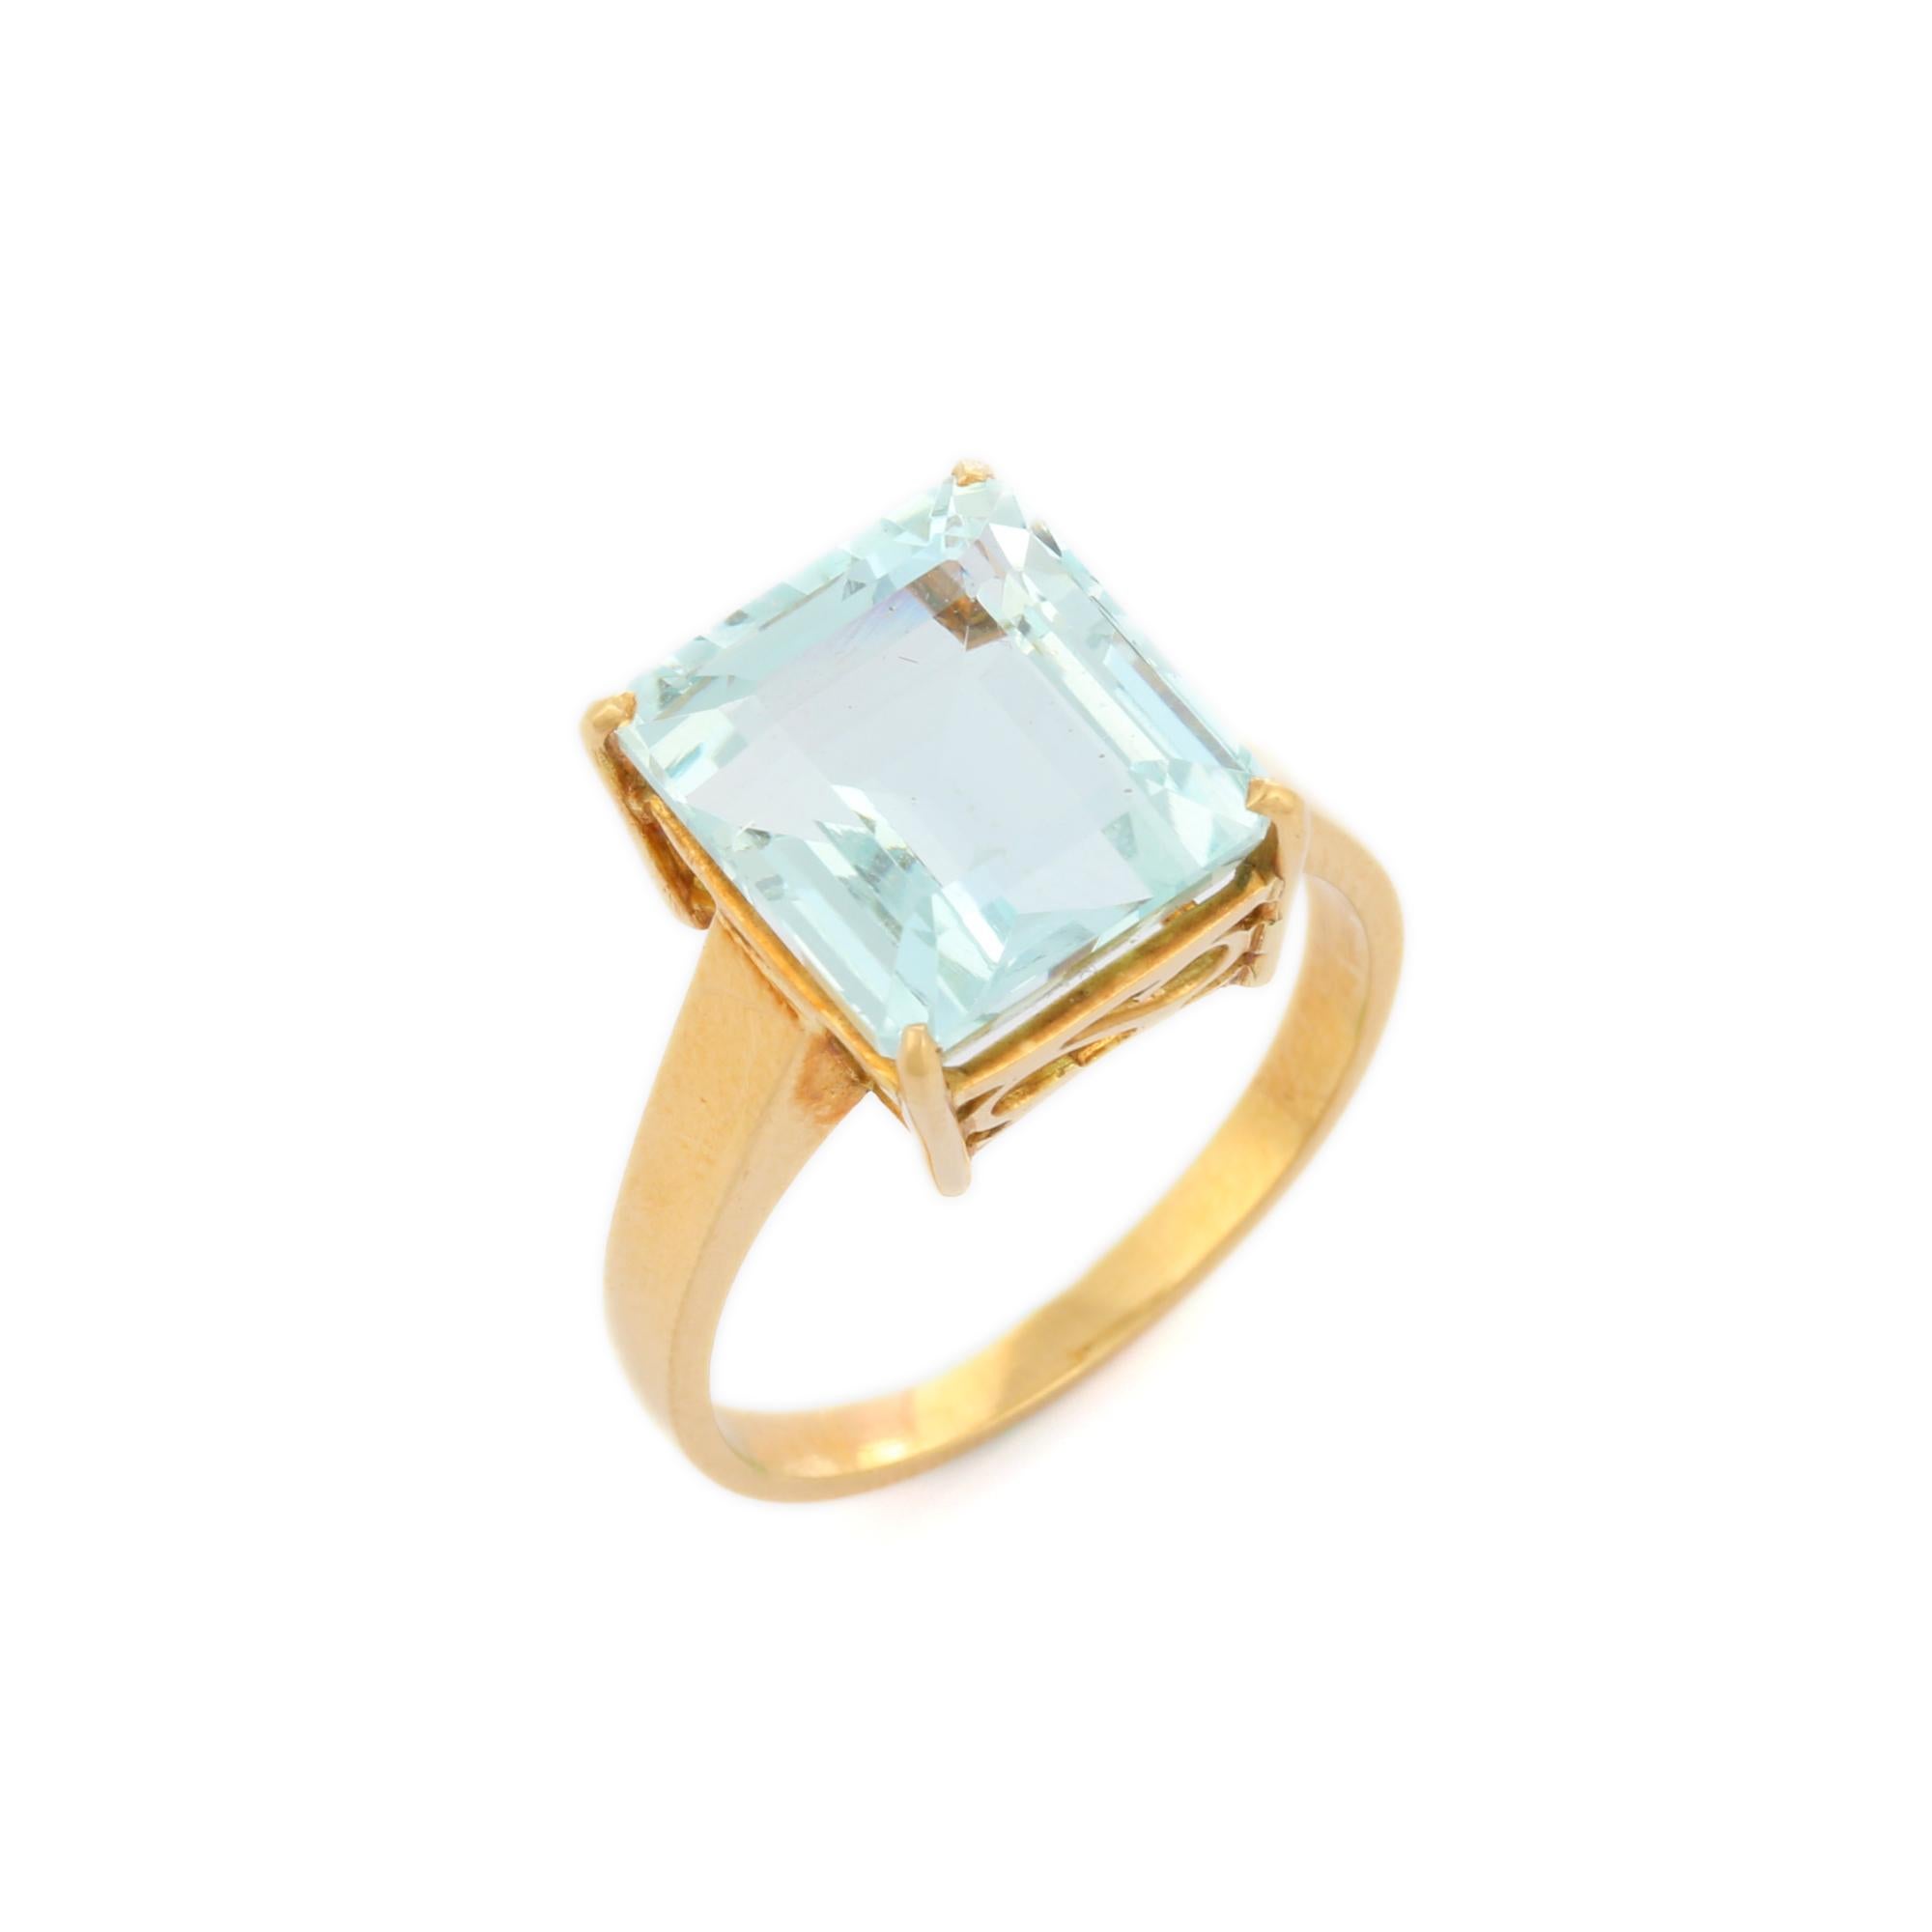 For Sale:  Octagon Shape Aquamarine Solitaire Ring in 18K Yellow Gold 9